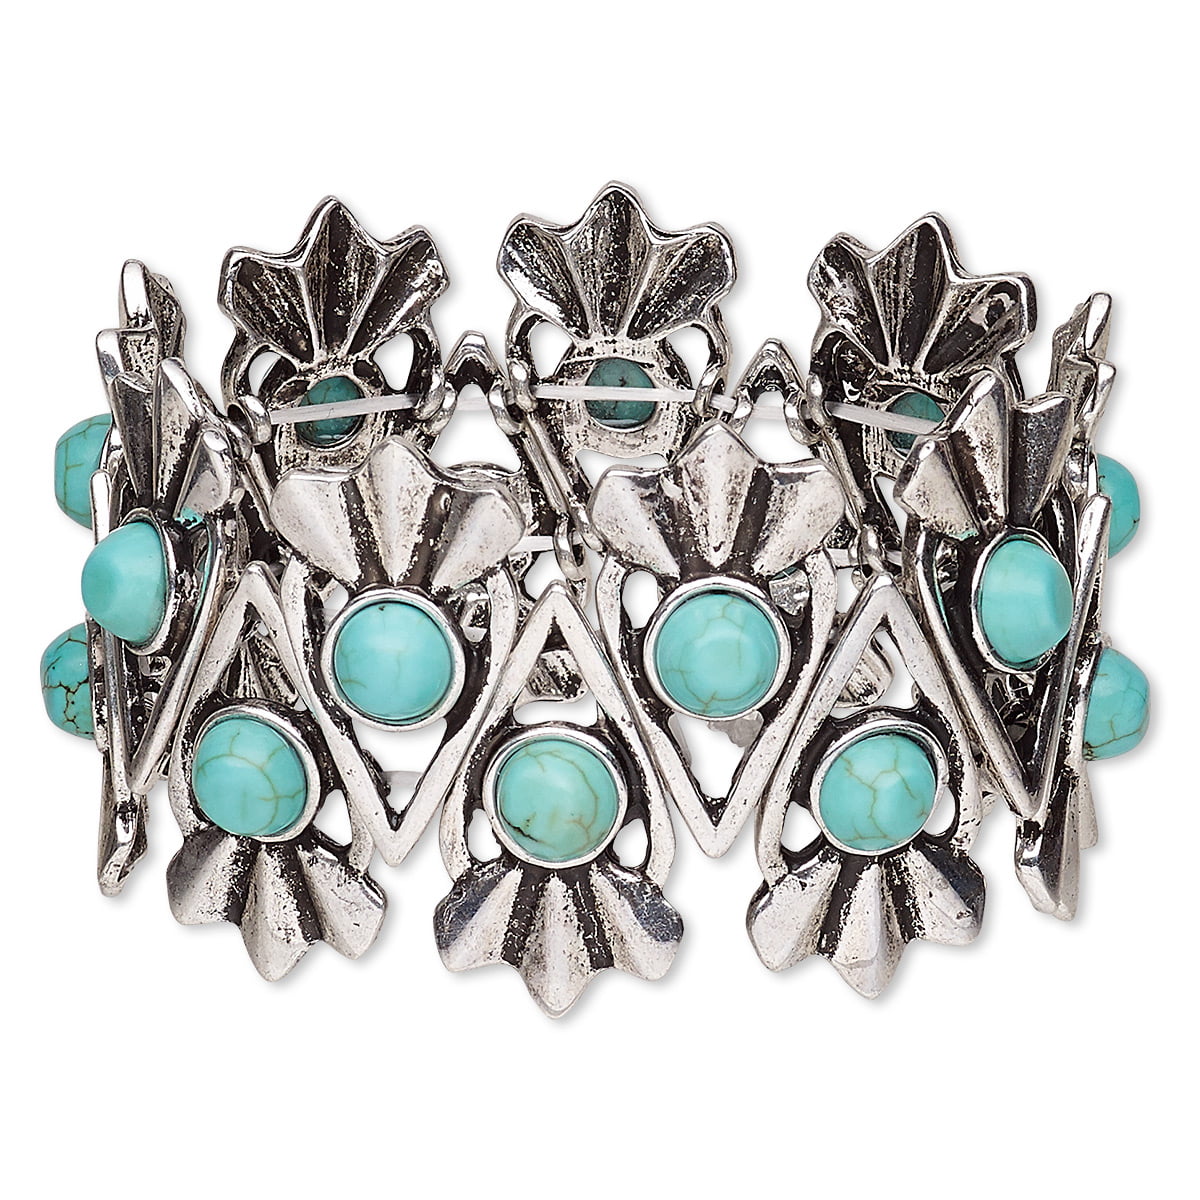 Charming bracelet w  a pewter butterfly accent with turquoise and pewter beads on a stretchy cord.